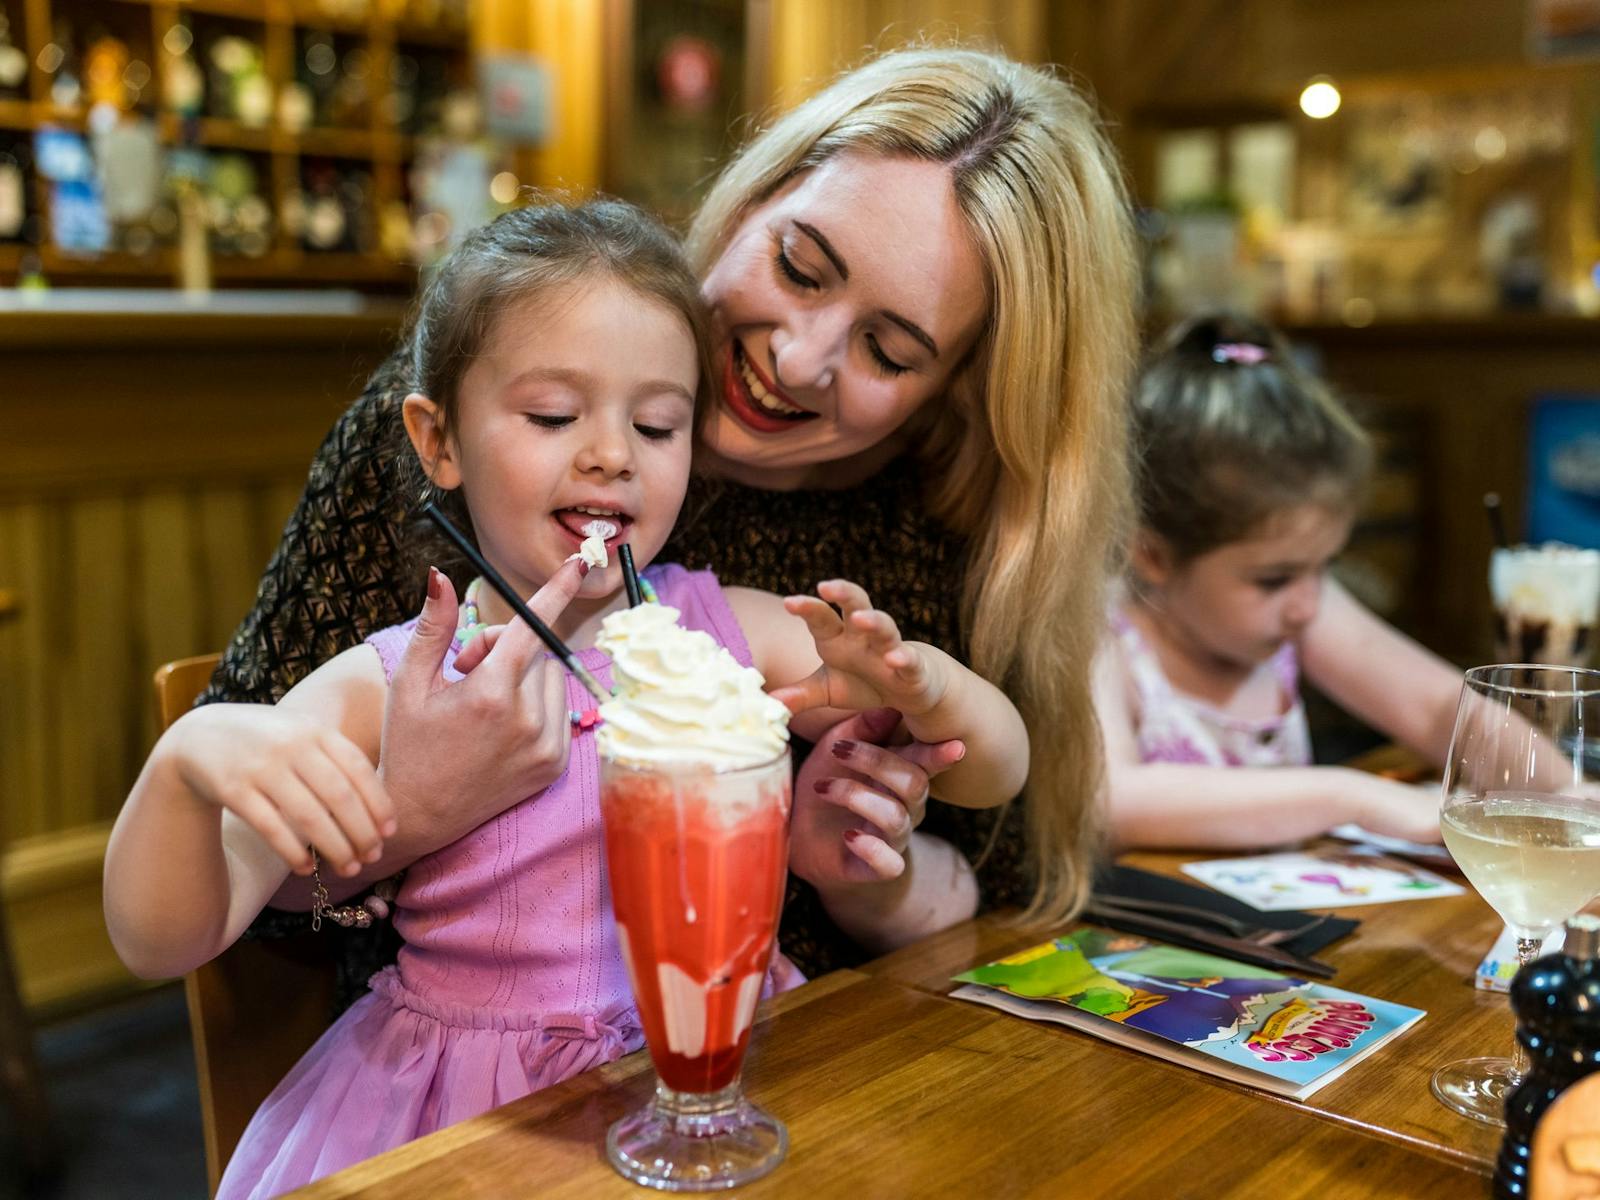 A mother smiles as she lets her youngest daughter lick whipped cream off her finger from milkshake